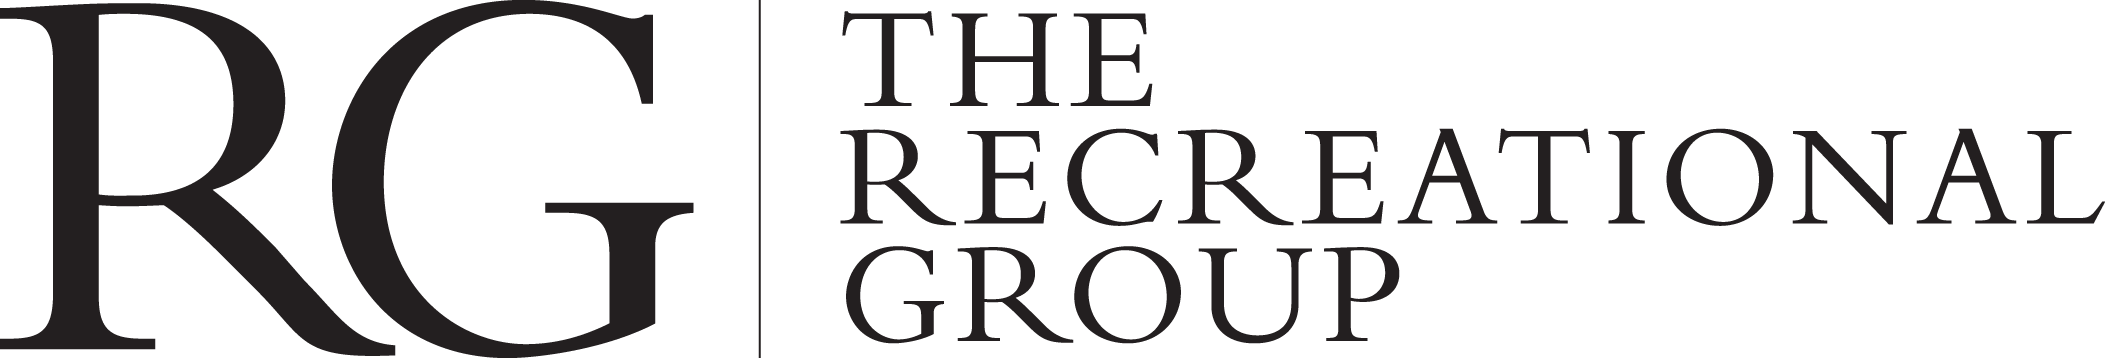 The Recreational Group